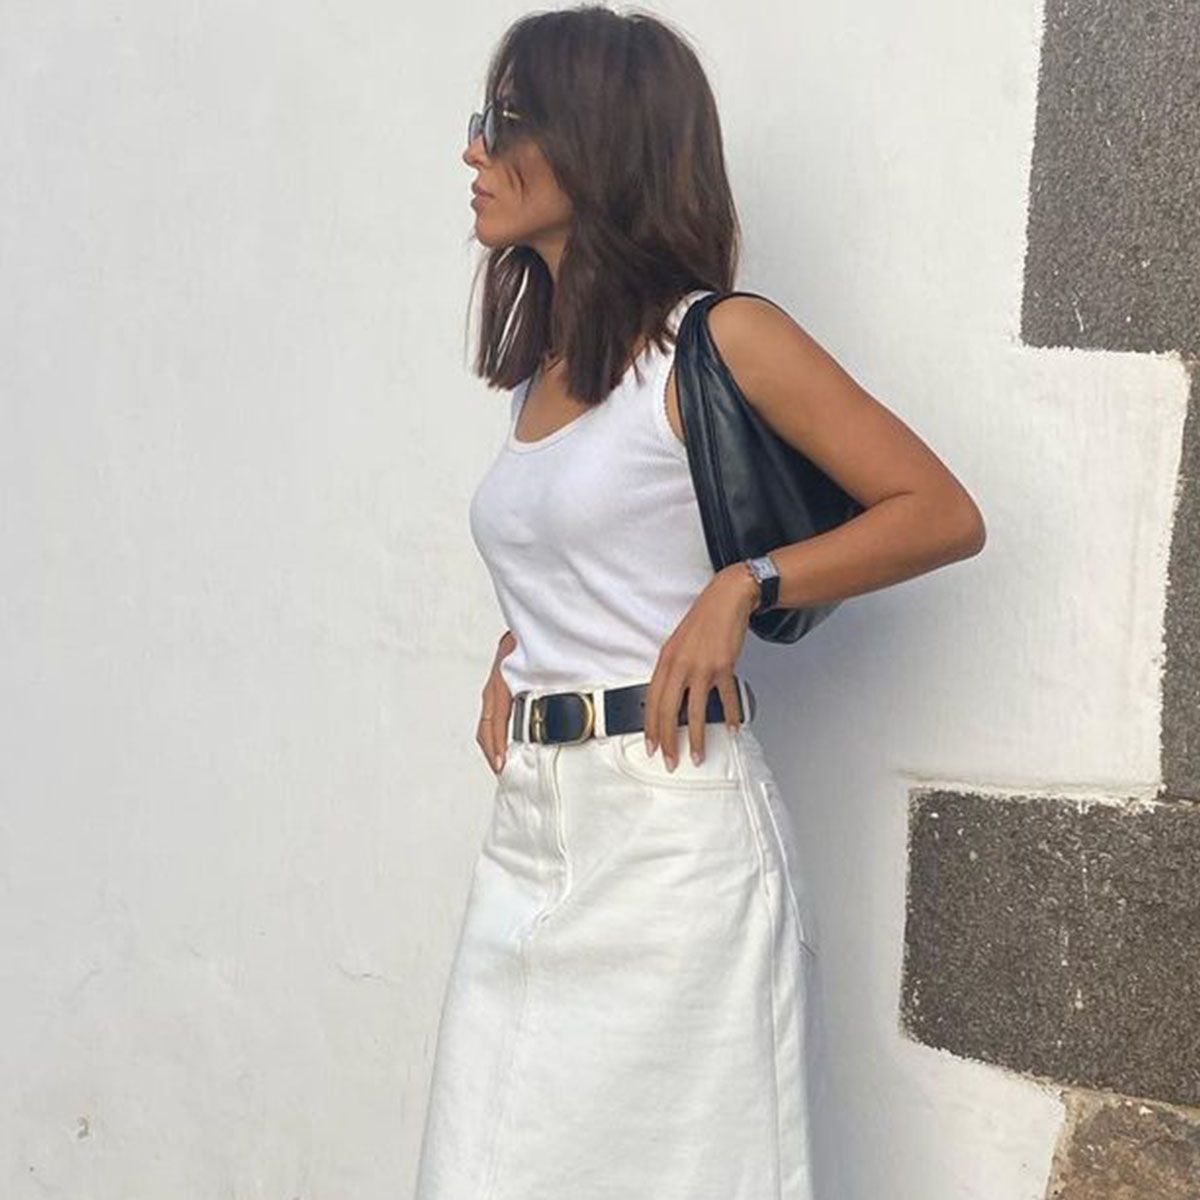 The Best Outfits With Belts for Spring